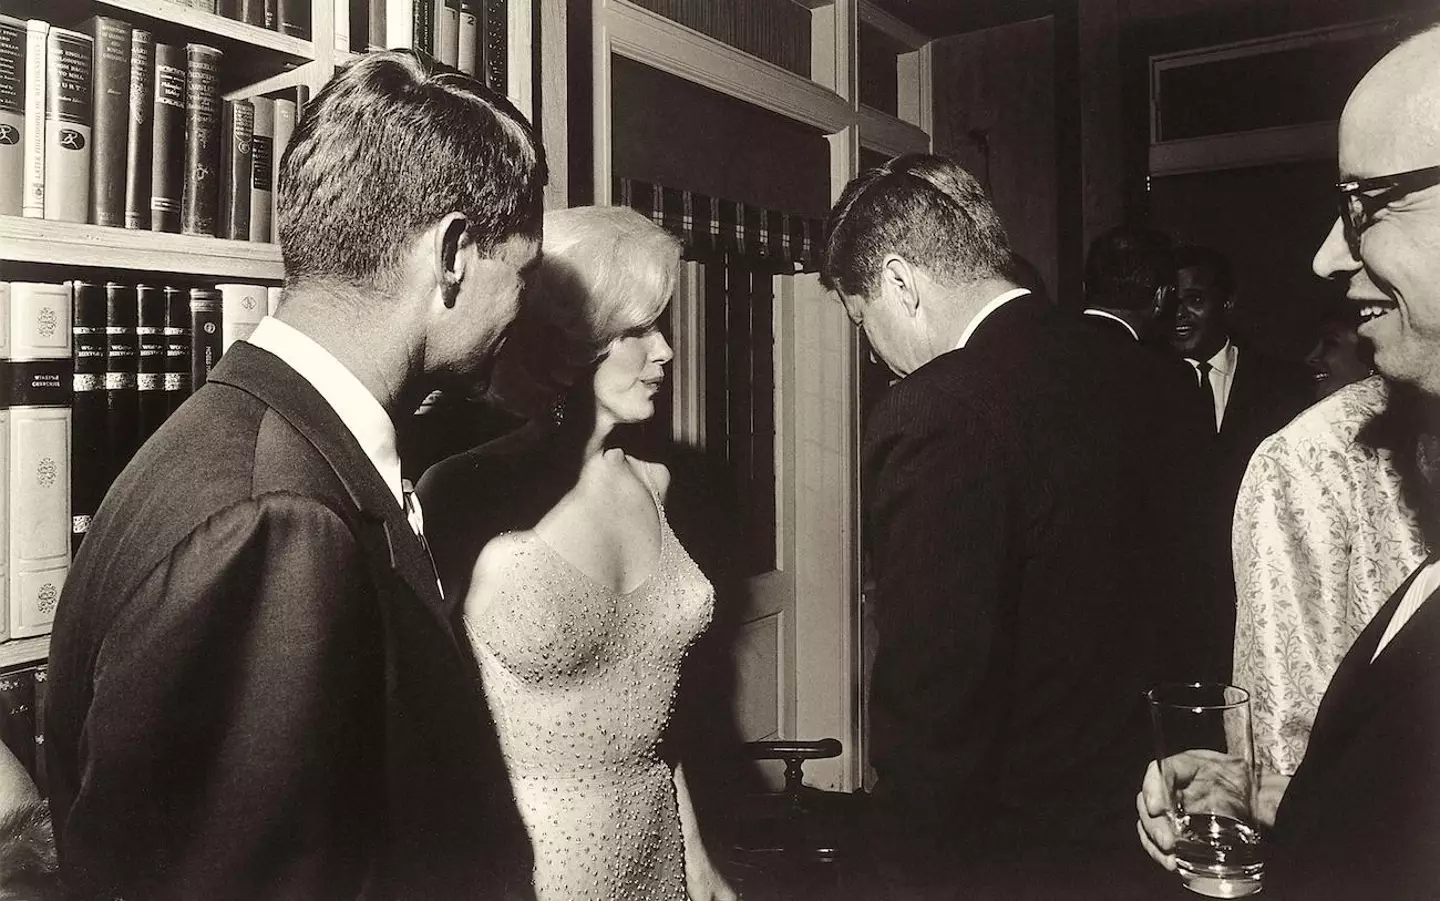 Marilyn Monroe, on the occasion of President Kennedy's 45th birthday celebrations at Madison Square Garden in New York City.